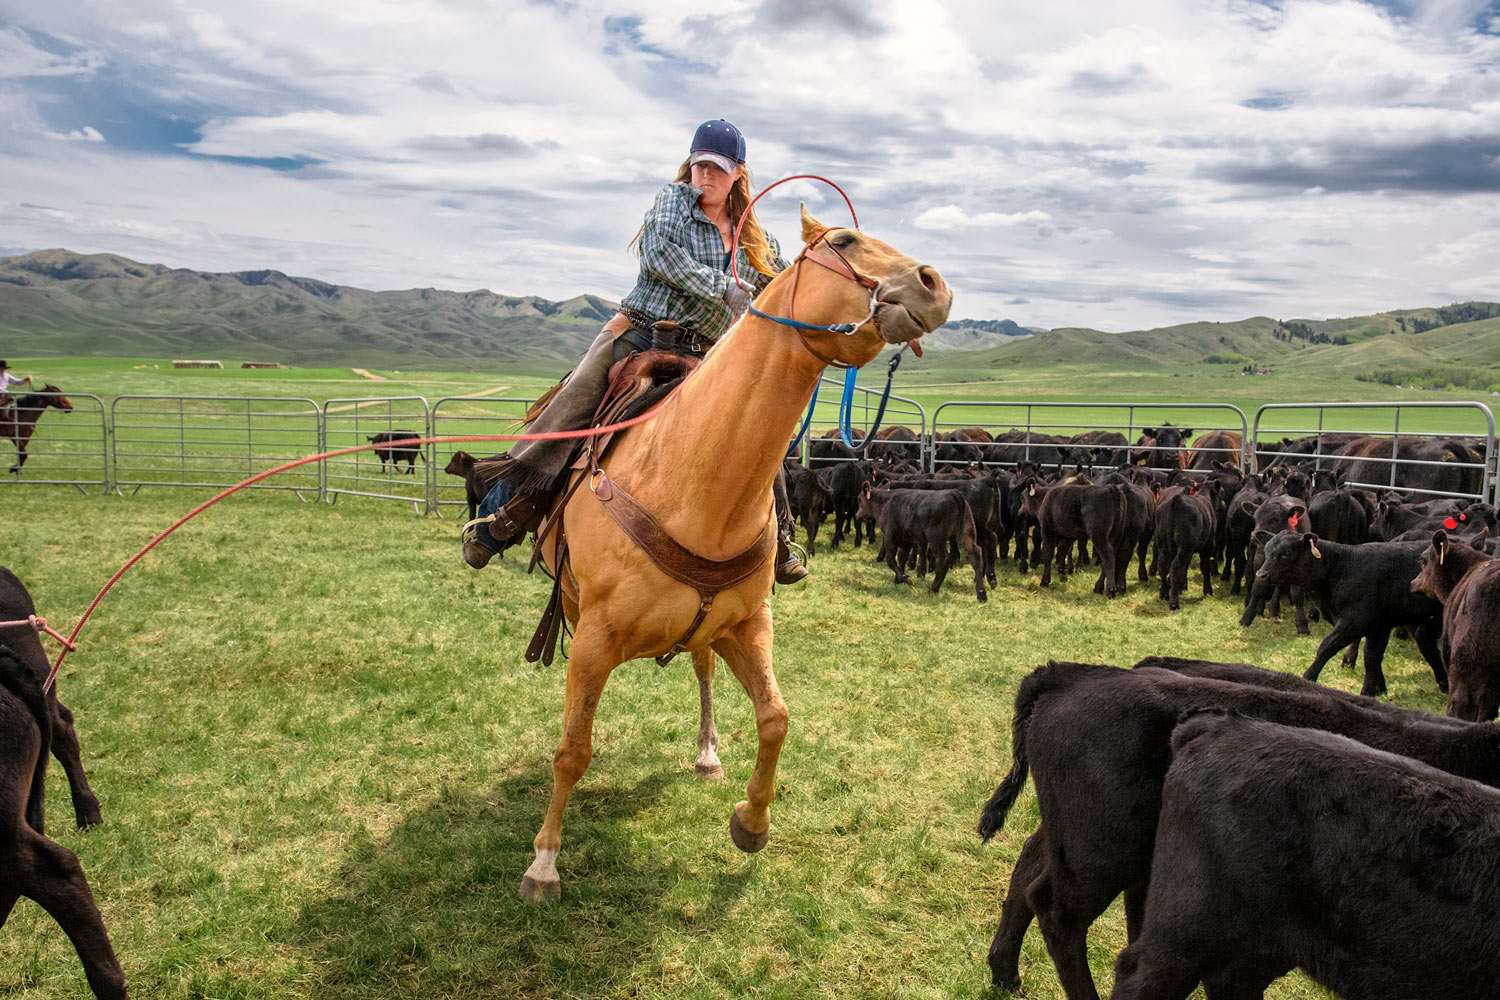 A cowgirl pulls back on the rope after roping a calf near Lloyd, Montana.&nbsp;→ License Photo